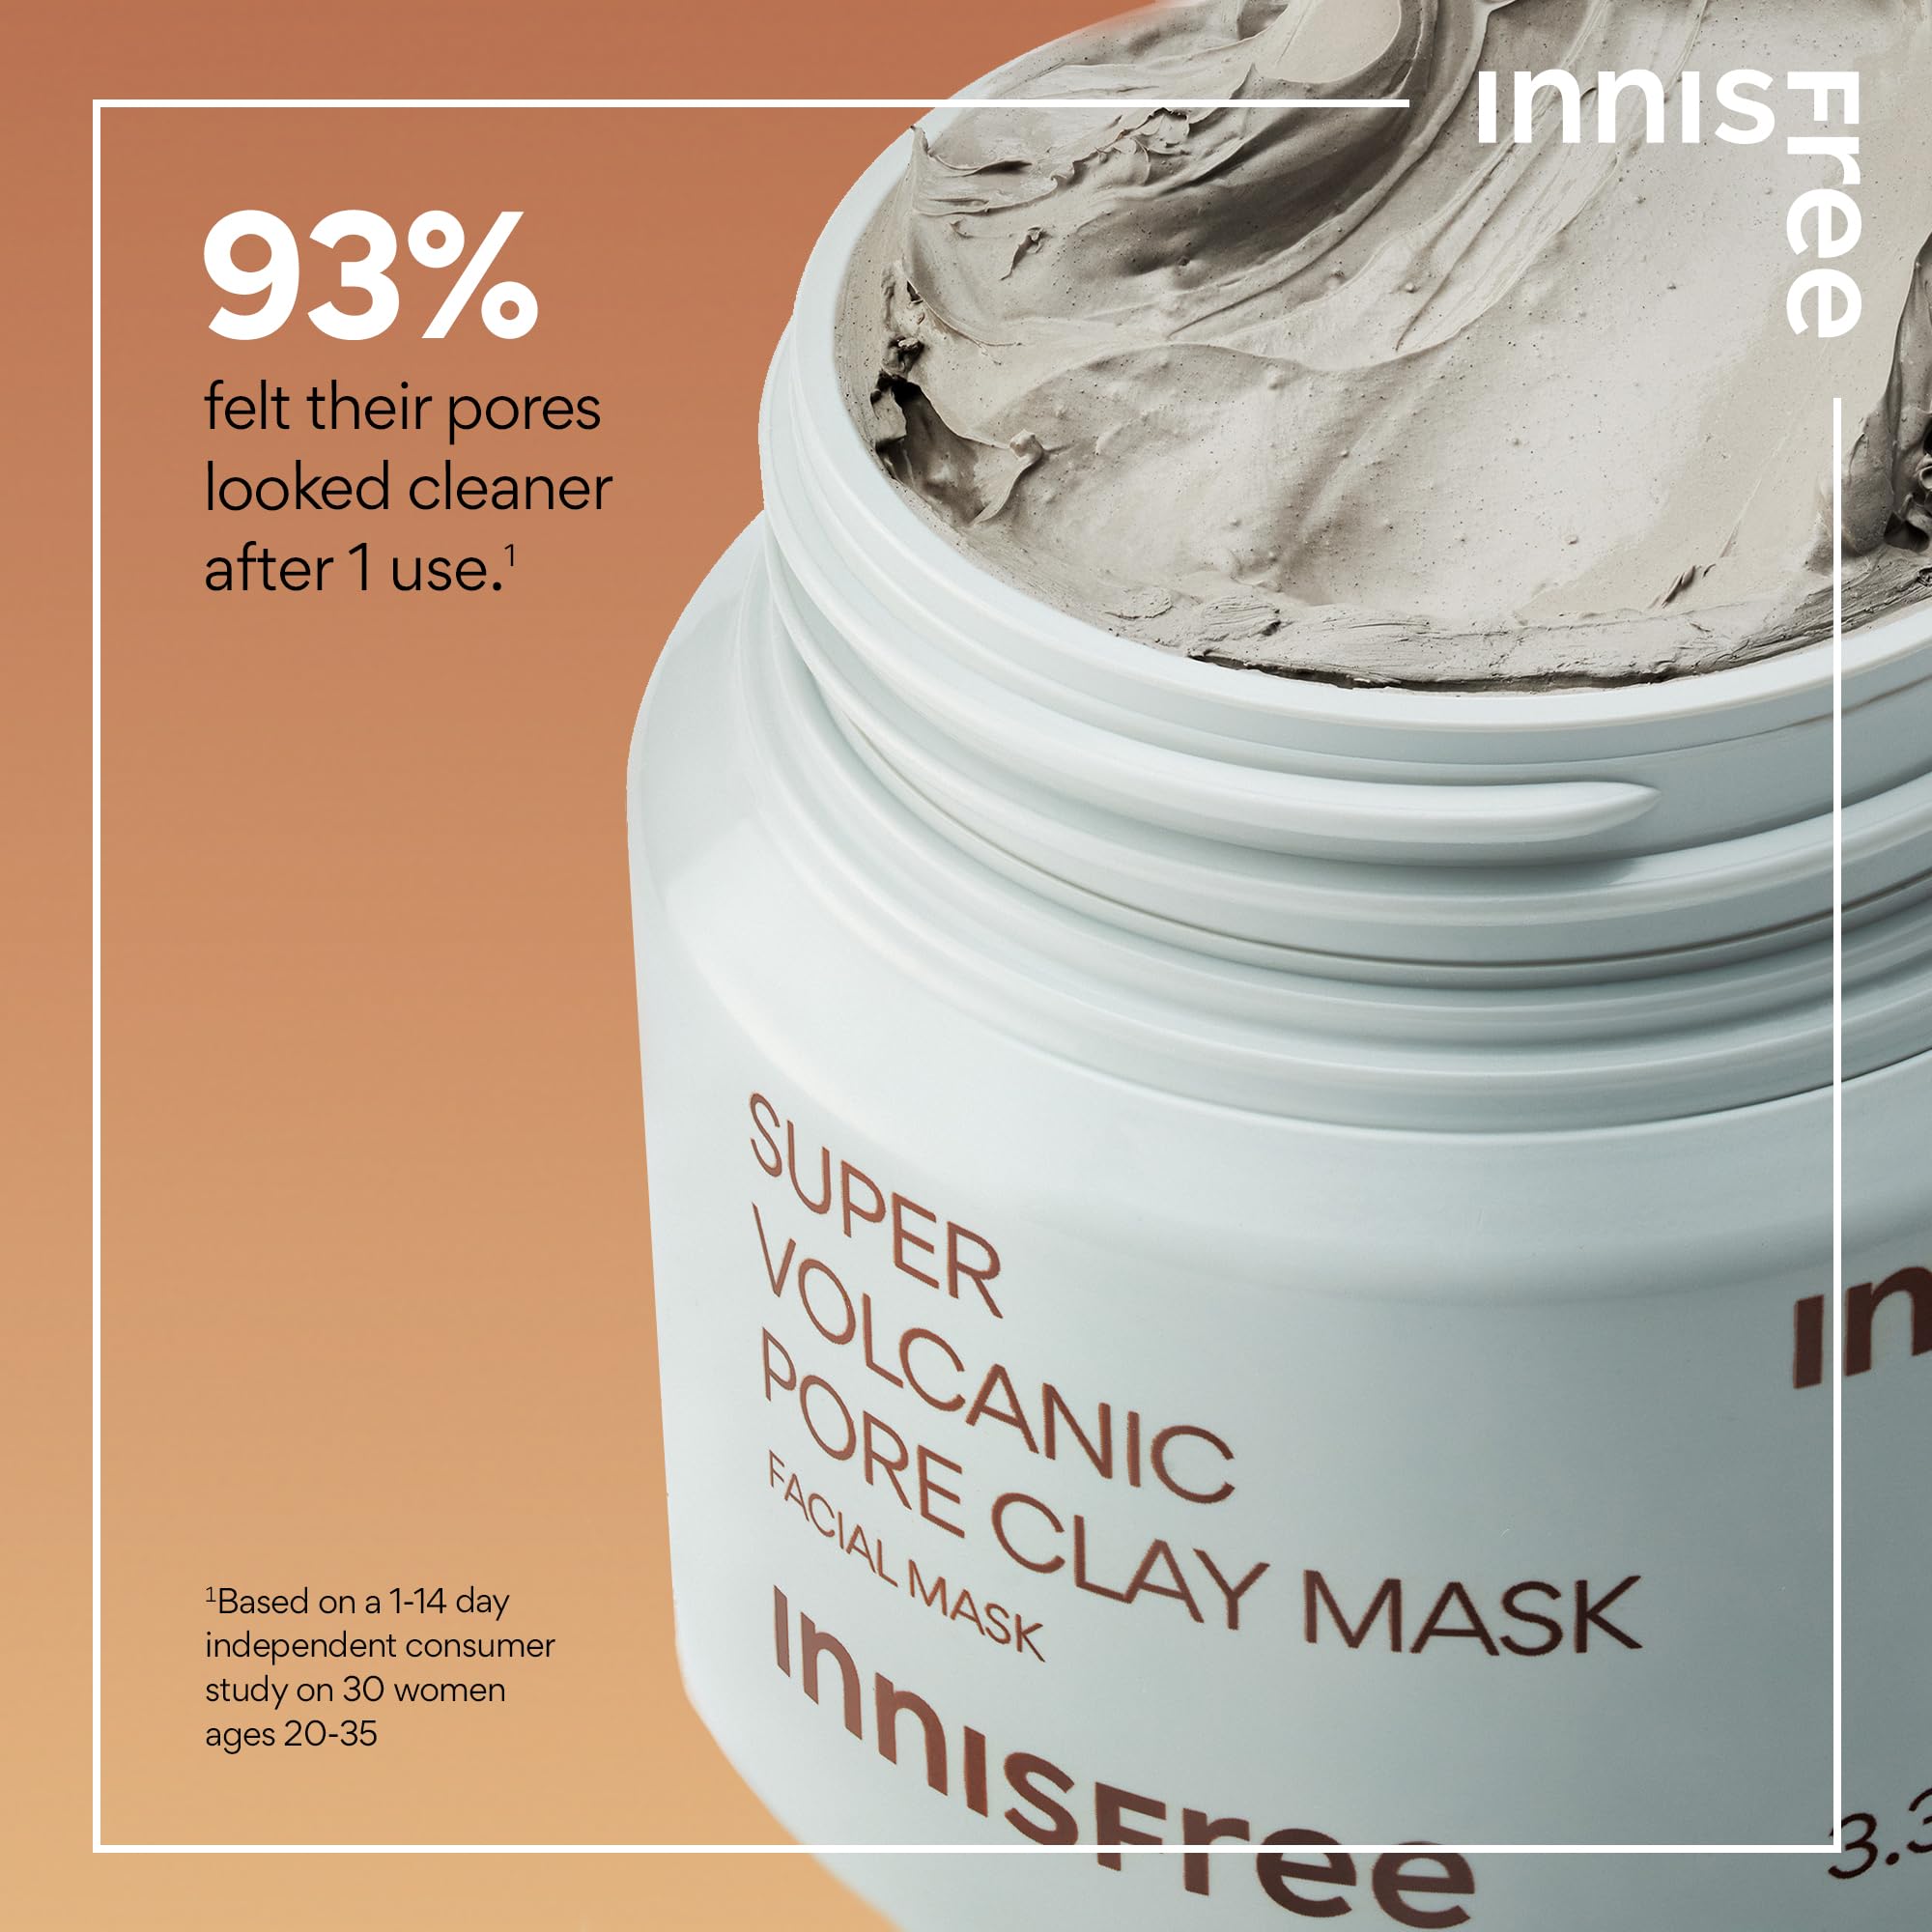 innisfree Super Volcanic Pore Clearing Clay Mask Face Treatment